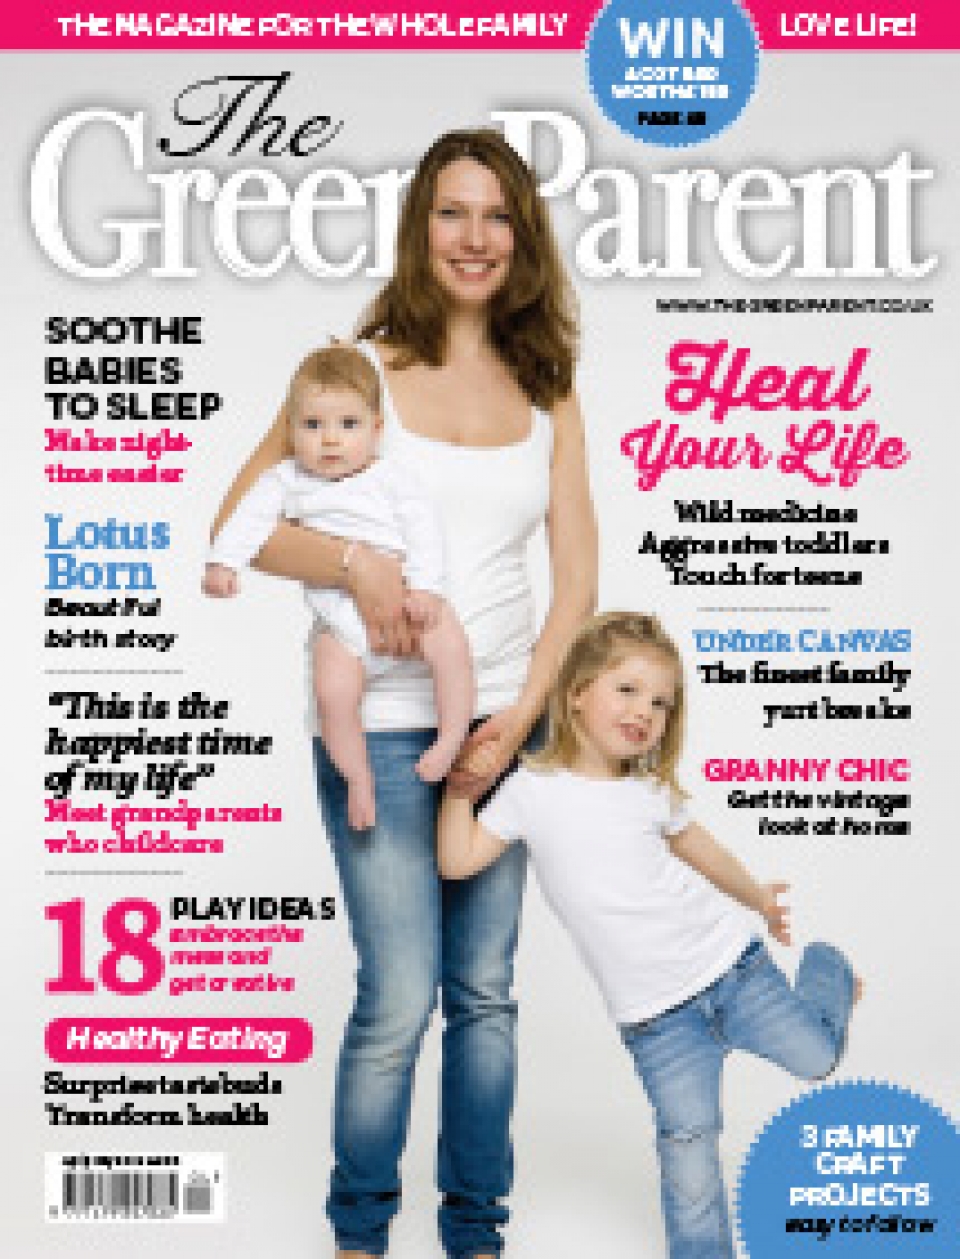 The Green Parent Issue 52 Cover